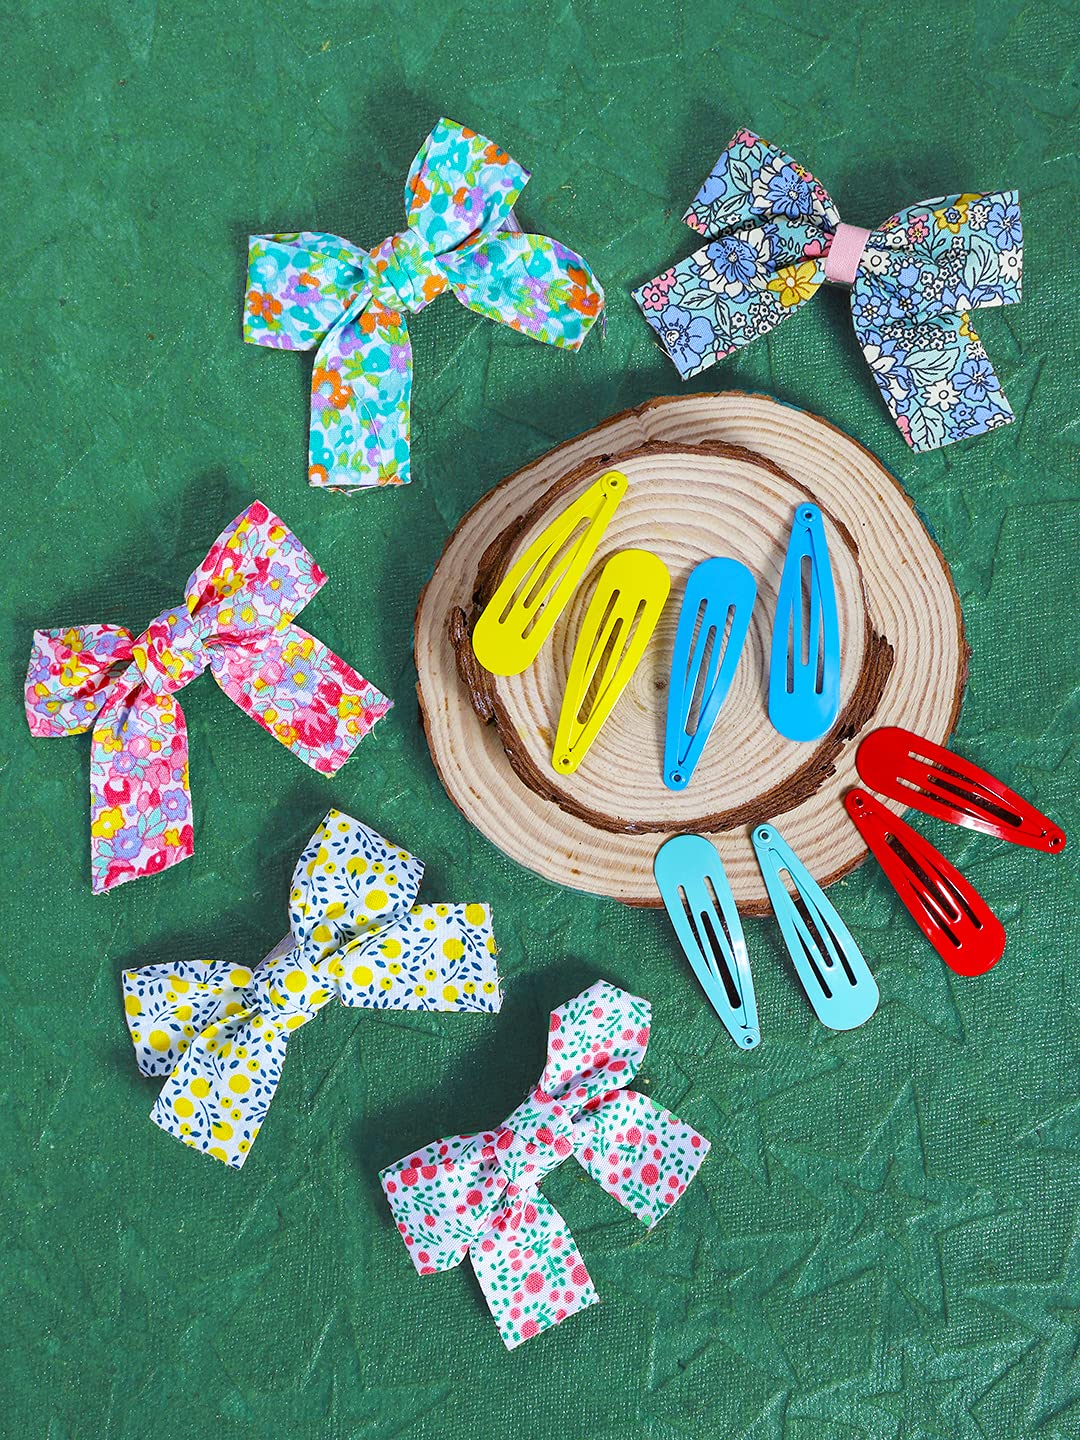 Melbees by Yellow Chimes Combo of 13 pcs with 5 PCs Printed Bow Hair Clips Ribbon Hair Clips and 8 Pcs Hair Snap Clips Hair Accessories for Kids Girls, Multi-Color, Meduim (YCHACL-KD003-MC)